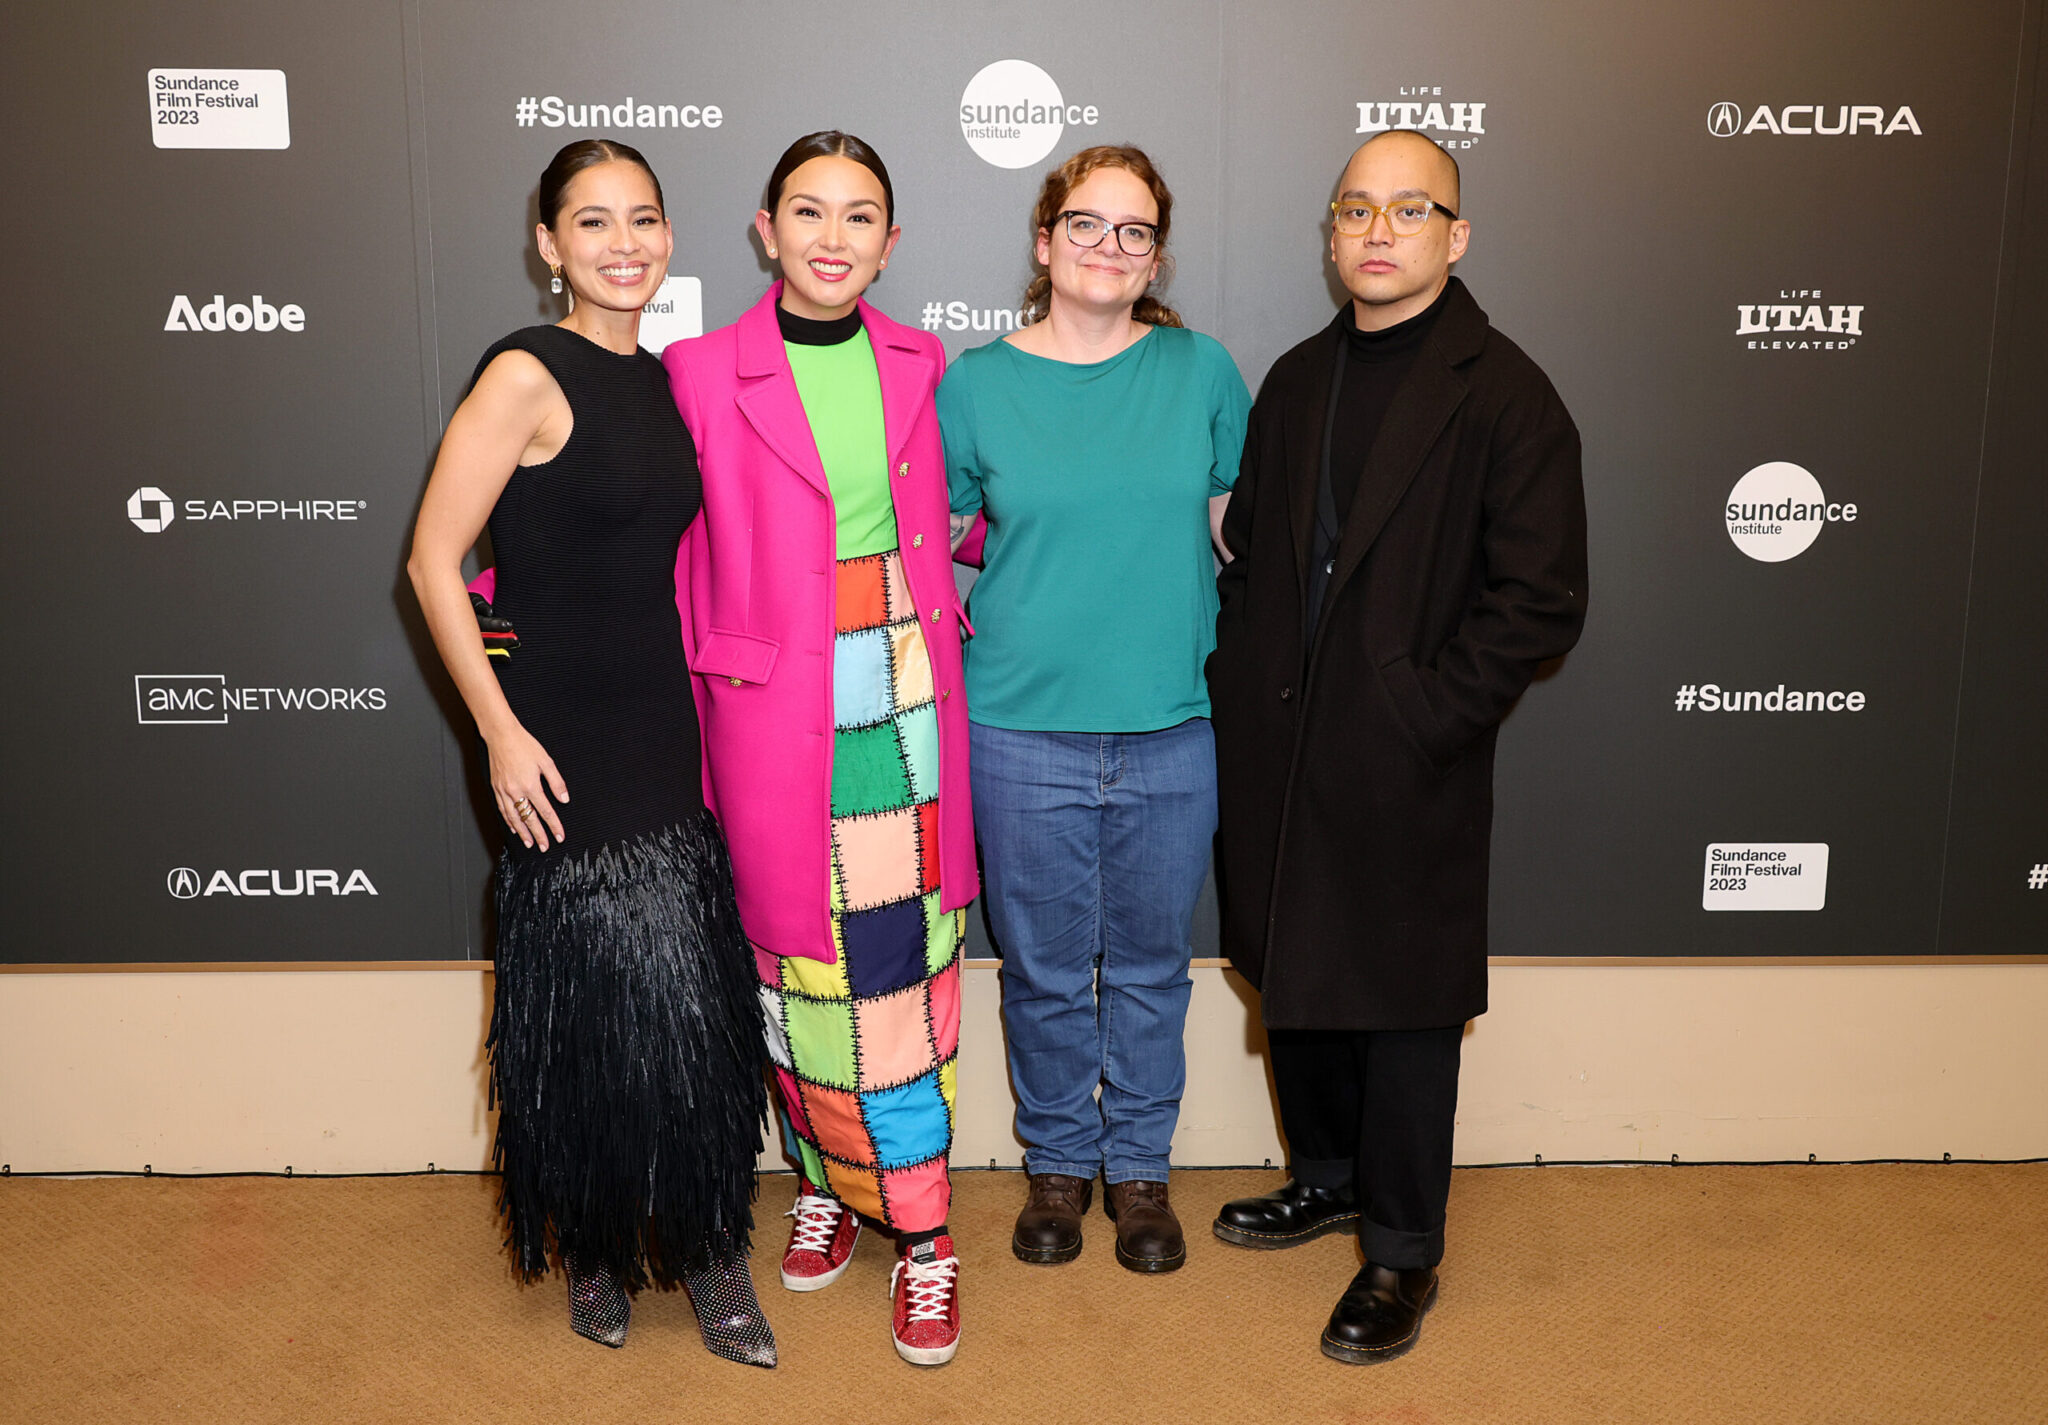 A woman with brown hair and a blakc dress, a woman with a pink coat over a colorful dress, a woman in an aqua-colored t-shirt and jeans, and a man in glasses dressed in all black, stand in front of a step and repeat at the 2023 Sundance Film Festival.